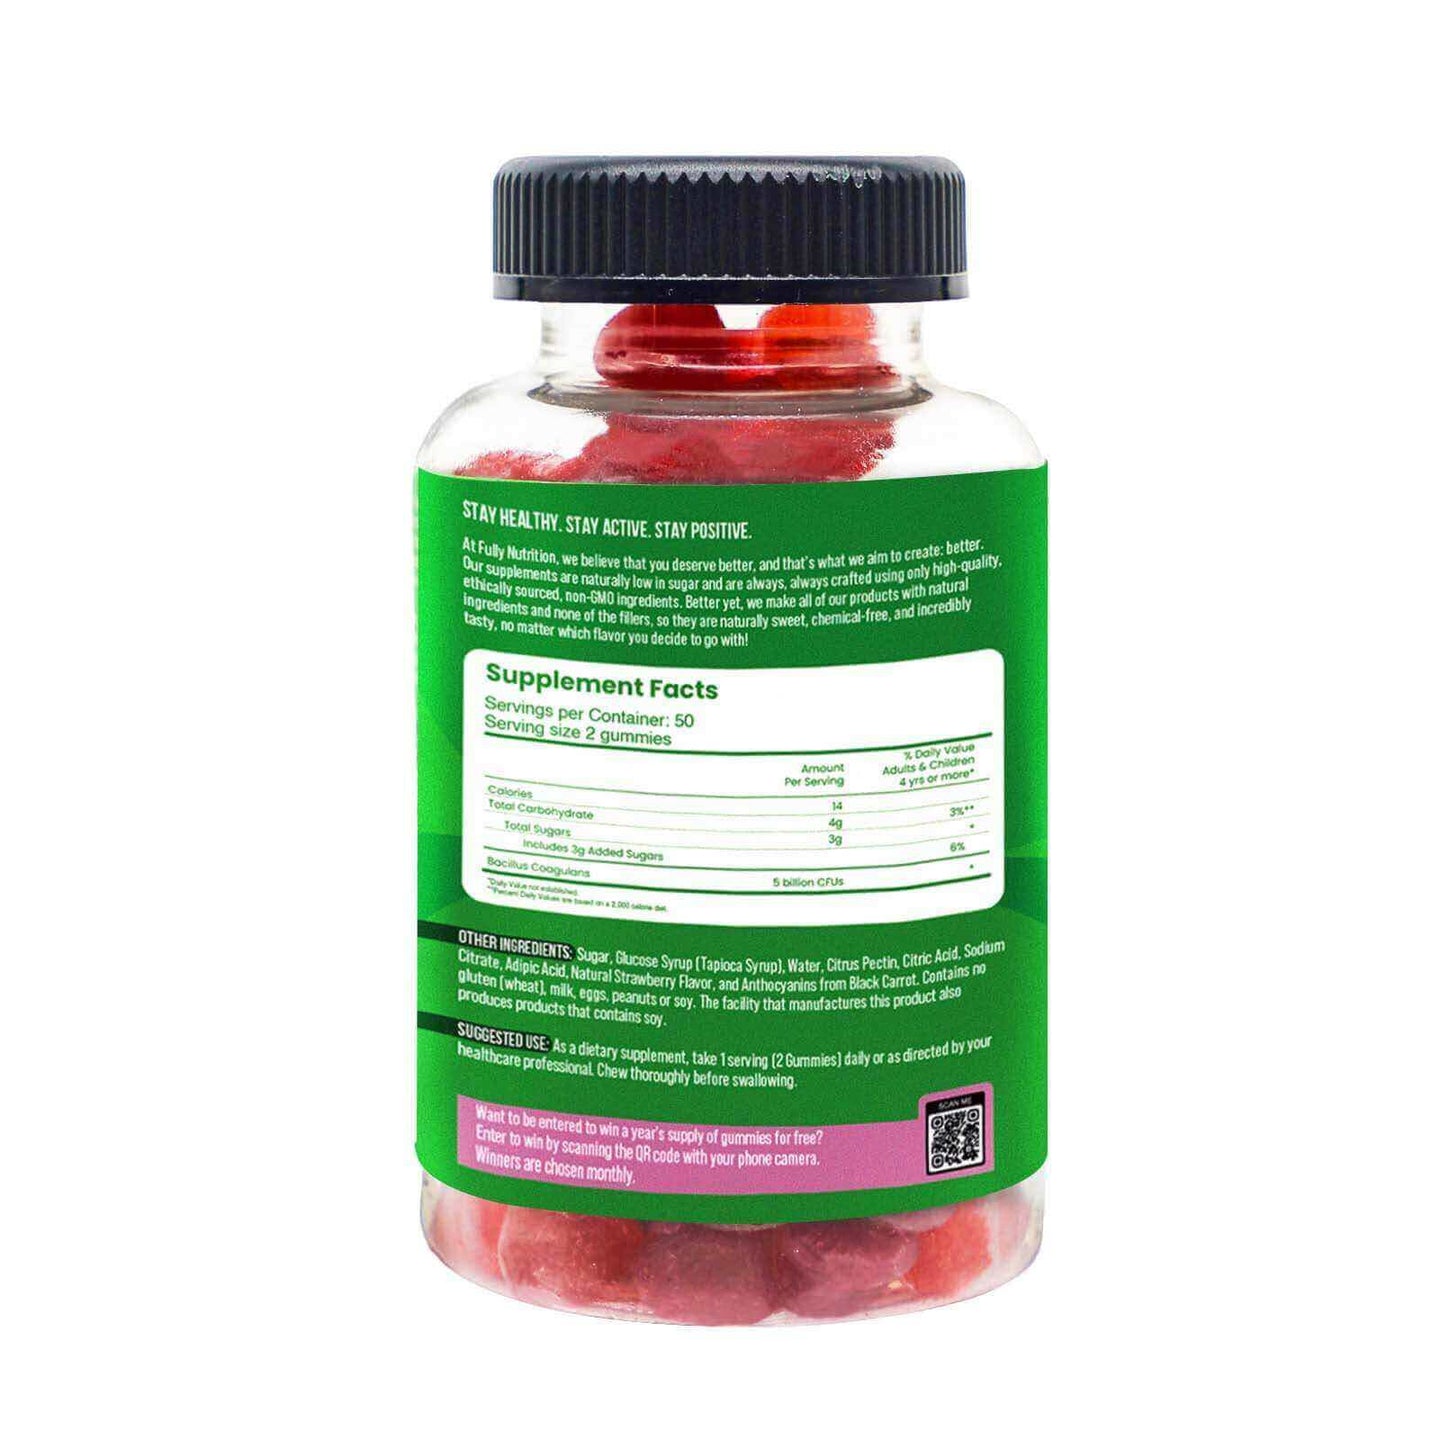 Image of back of a bottle of probiotic gummies showing the supplement facts, ingredients and dosage information